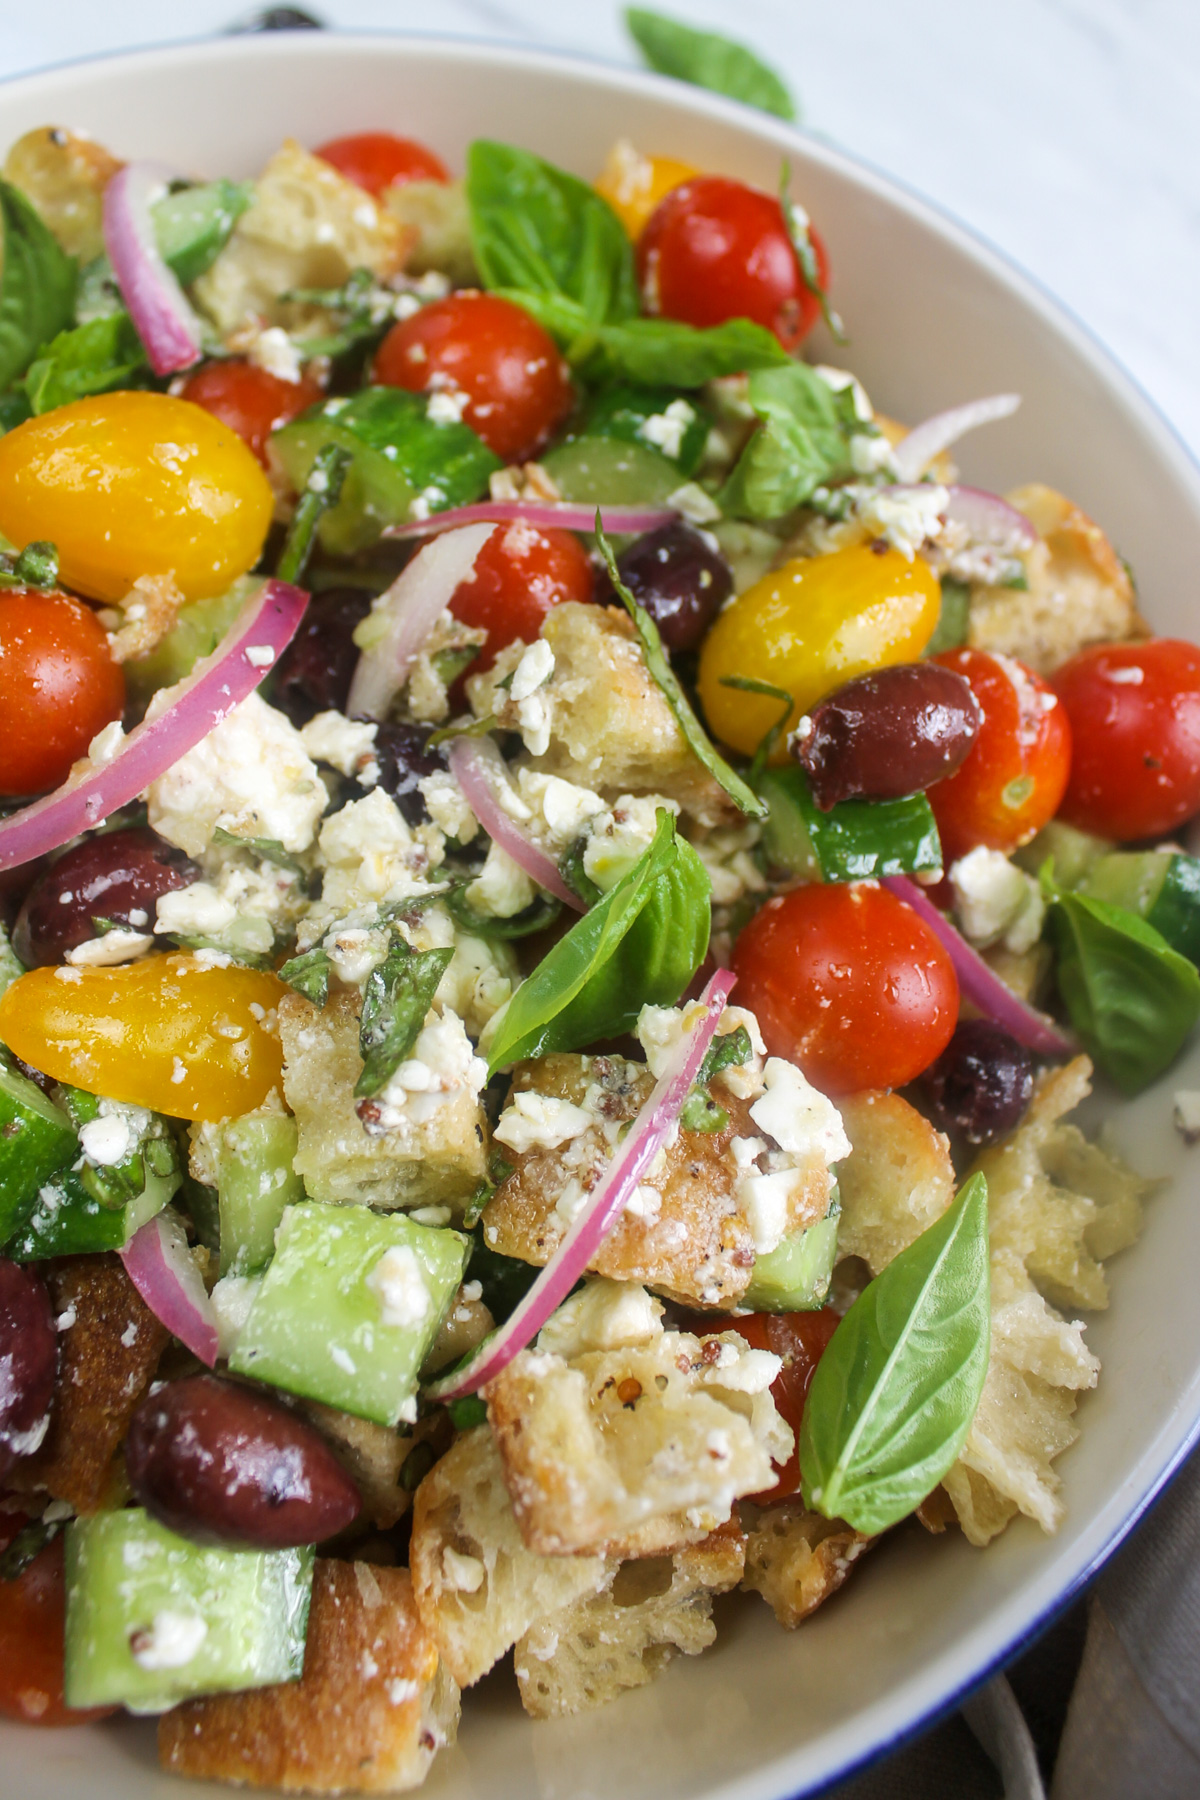 Healthy bread salad with yellow and red cherry tomatoes, feta and olives.